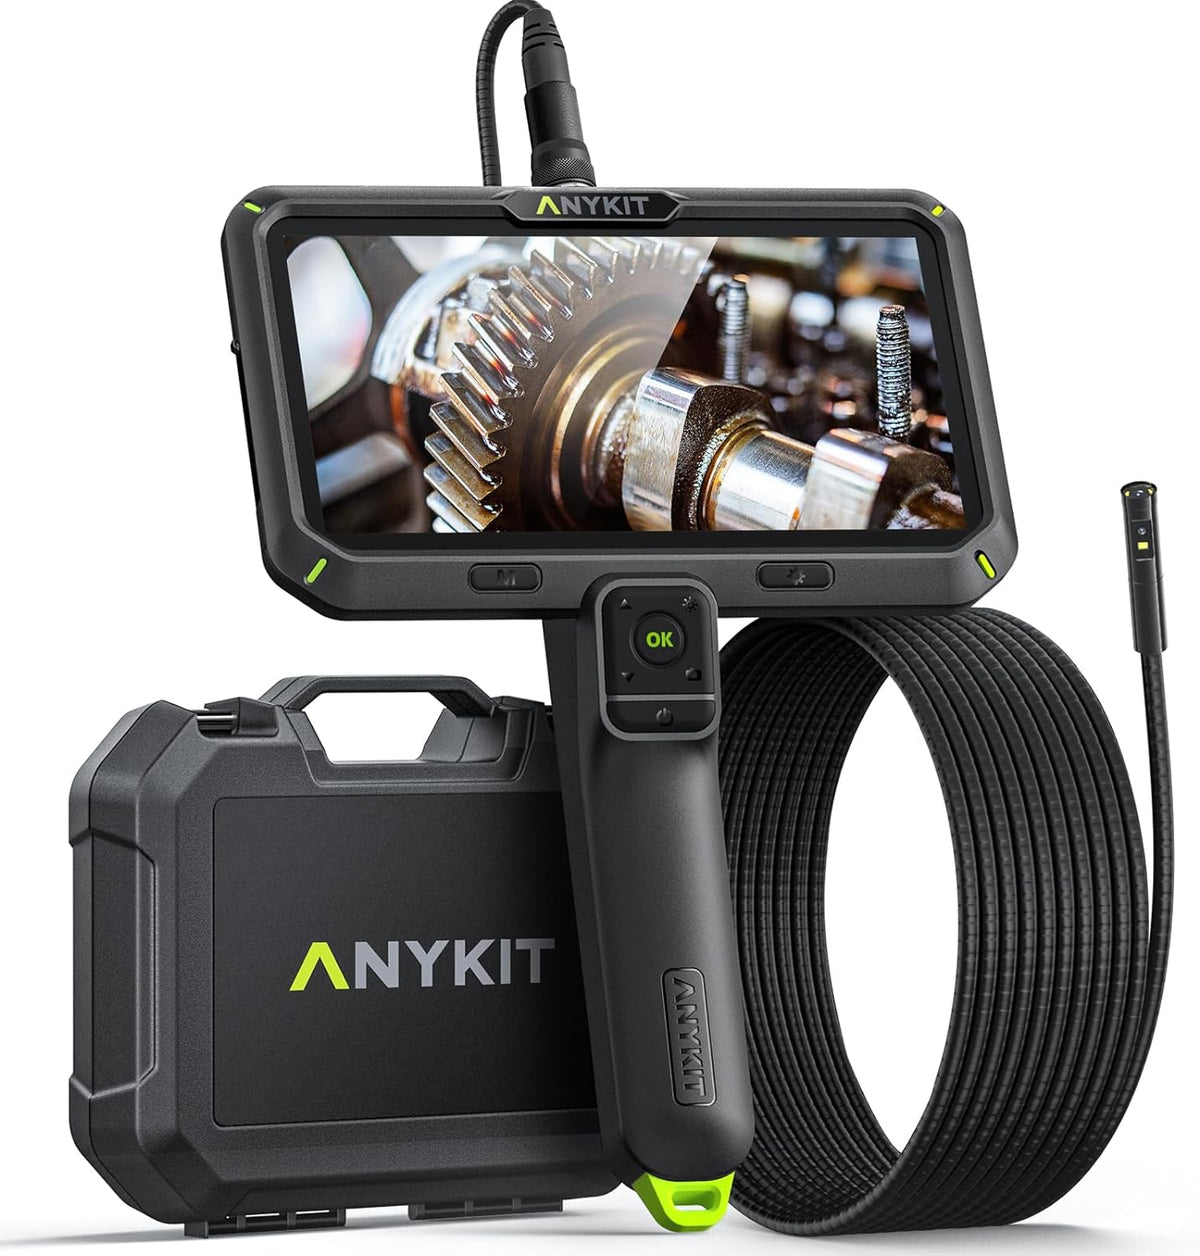 Anykit 6" IPS Screen Endoscope Camera with Light, Dual Lens Digital Inspection Camera with Split Screen, 1080P Industrial Borescope with WiFi Function,Flexible Gooseneck Snake Plumbing Camera